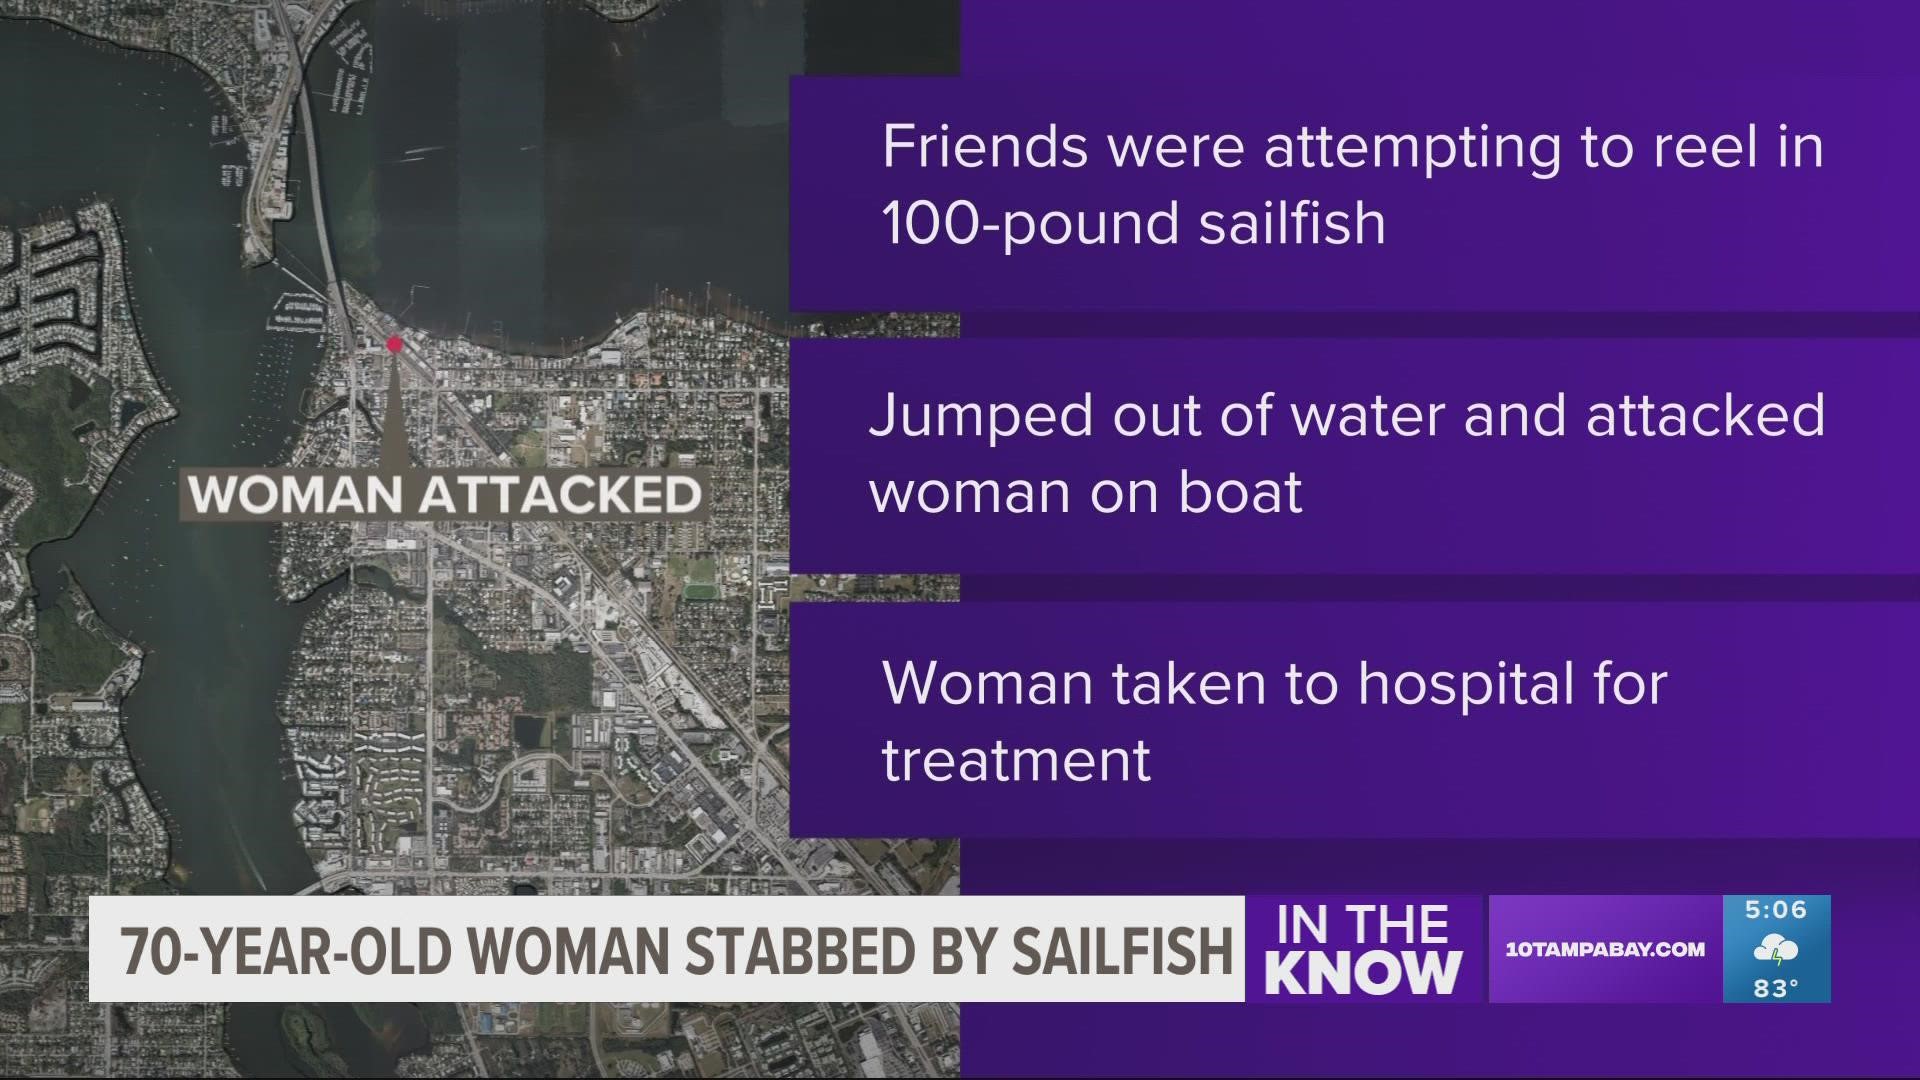 The sailfish stabbed the woman from Maryland in the groin area with its pointed bill on Tuesday while she was standing on a boat.